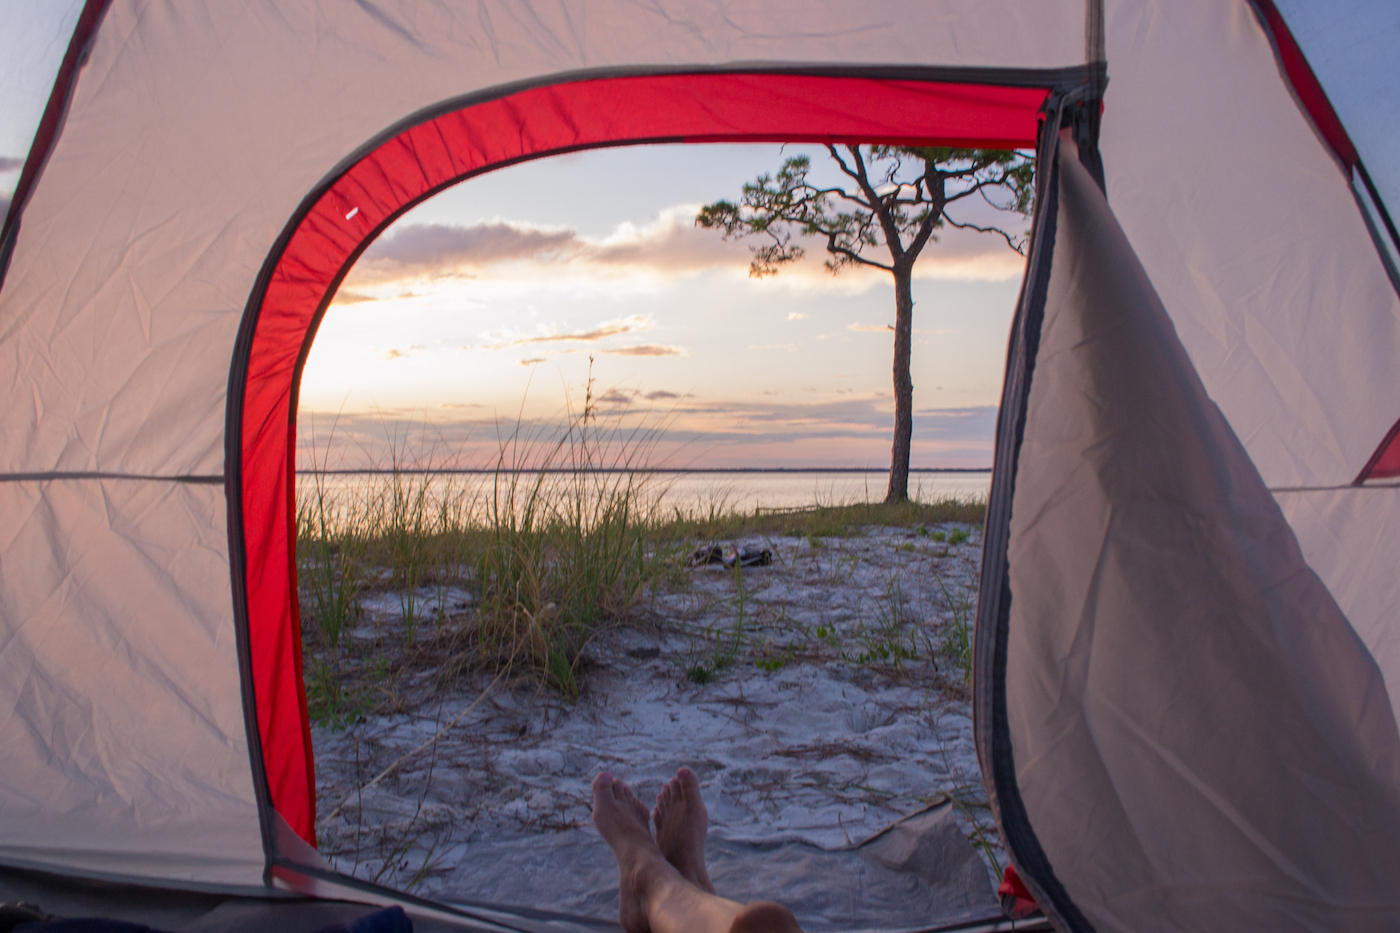 Camping on St George Island State Park in the Florida Panhandle right next to the water!